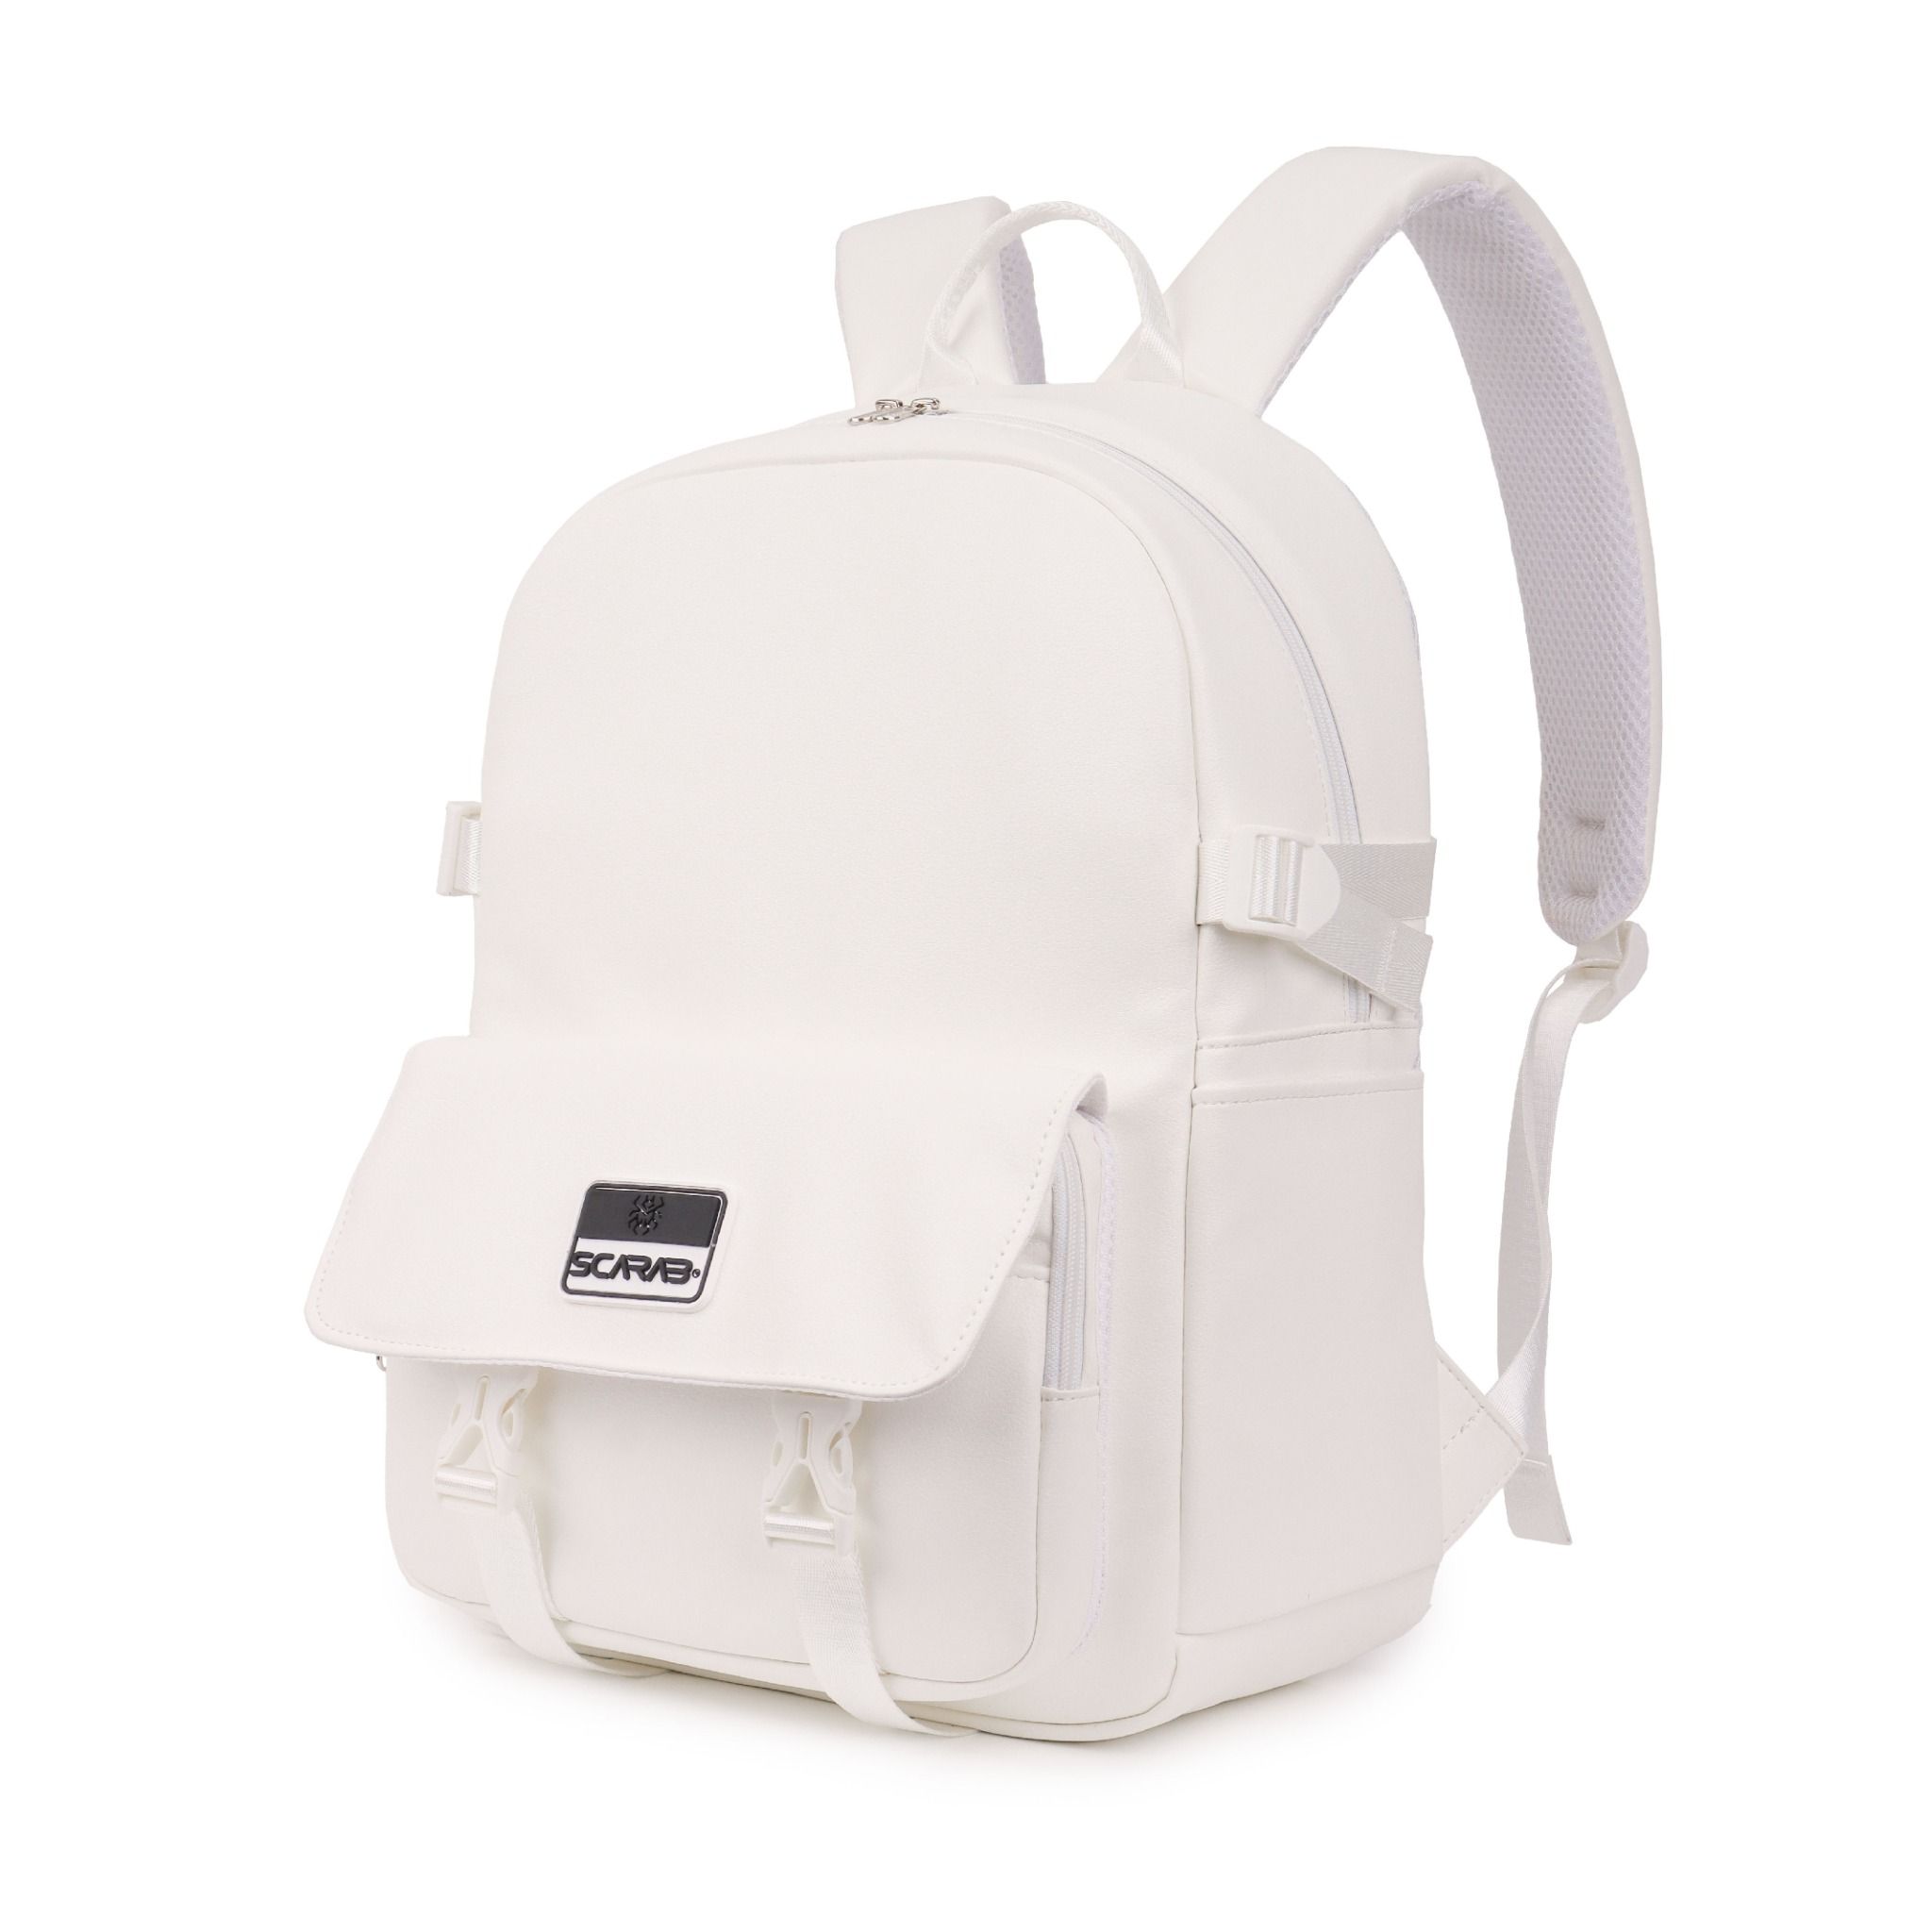  Chapter Backpack - White 